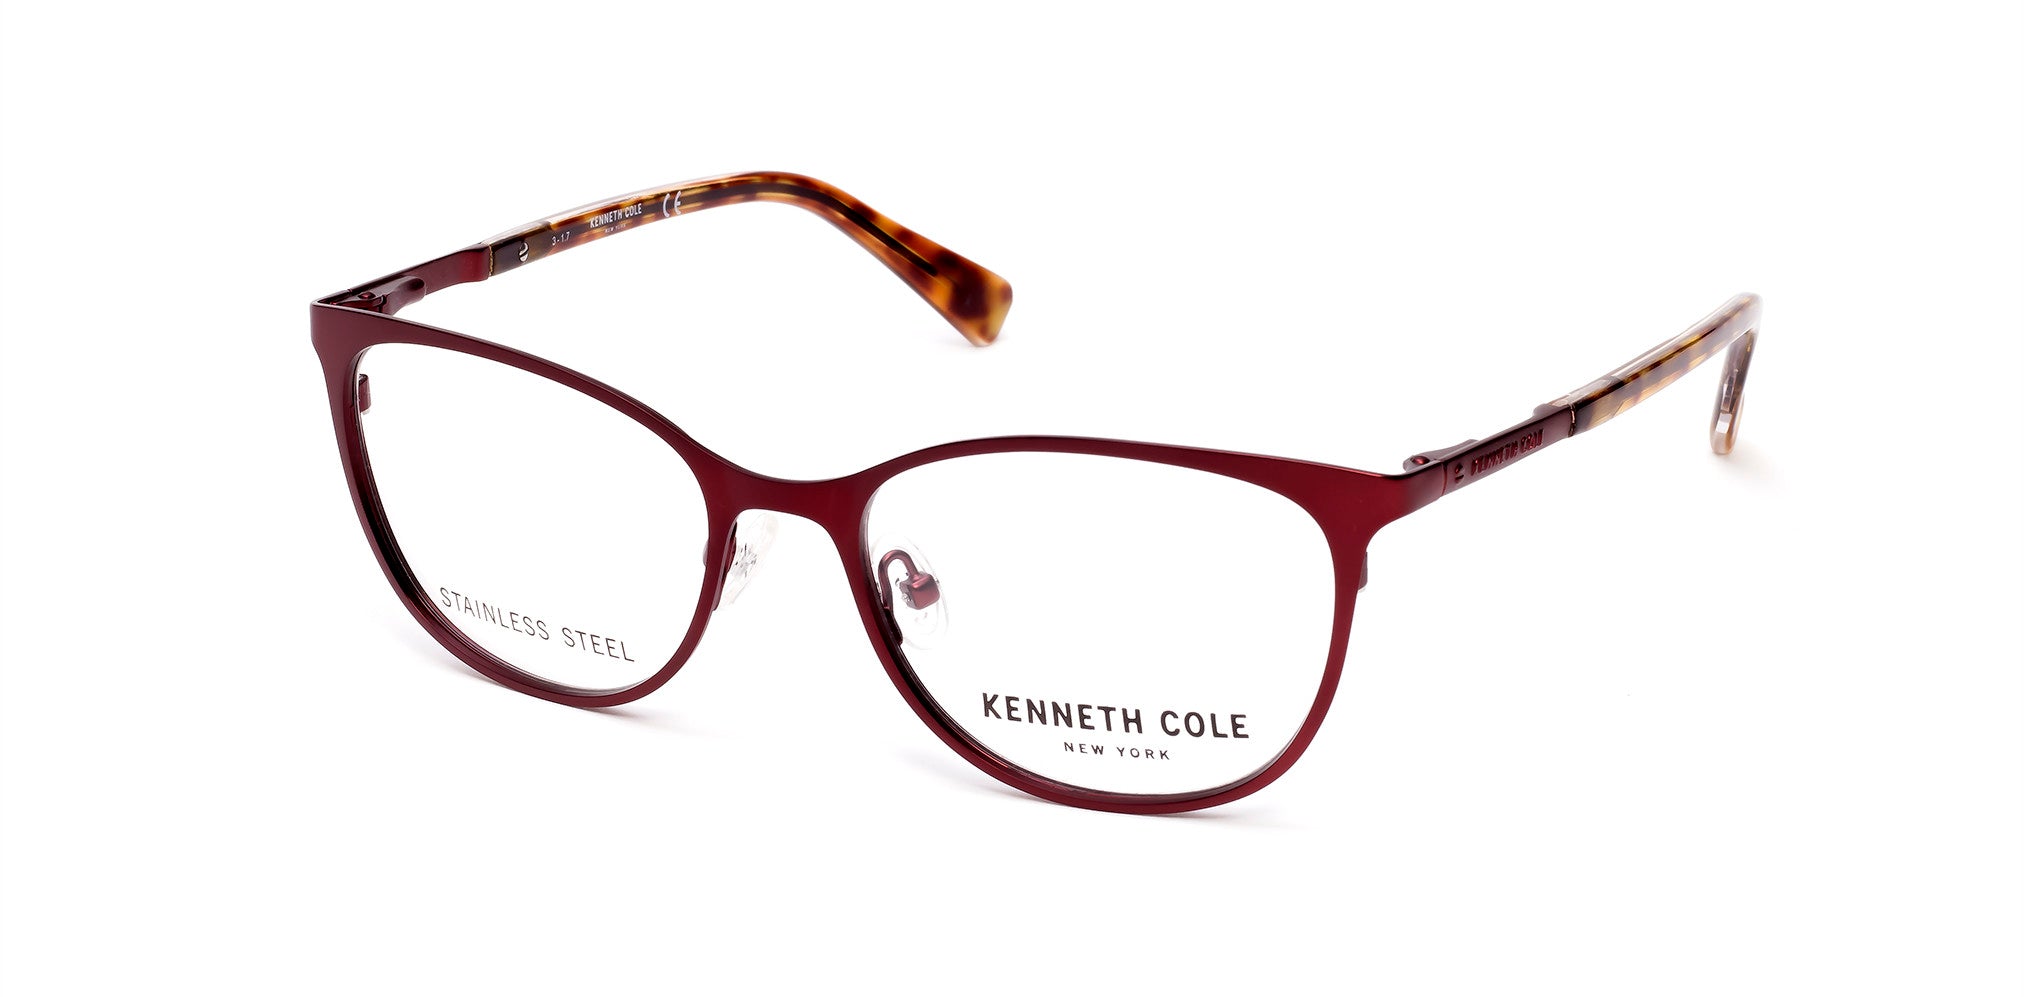 Kenneth Cole New York,Kenneth Cole Reaction KC0270 Eyeglasses 068-068 - Red/other